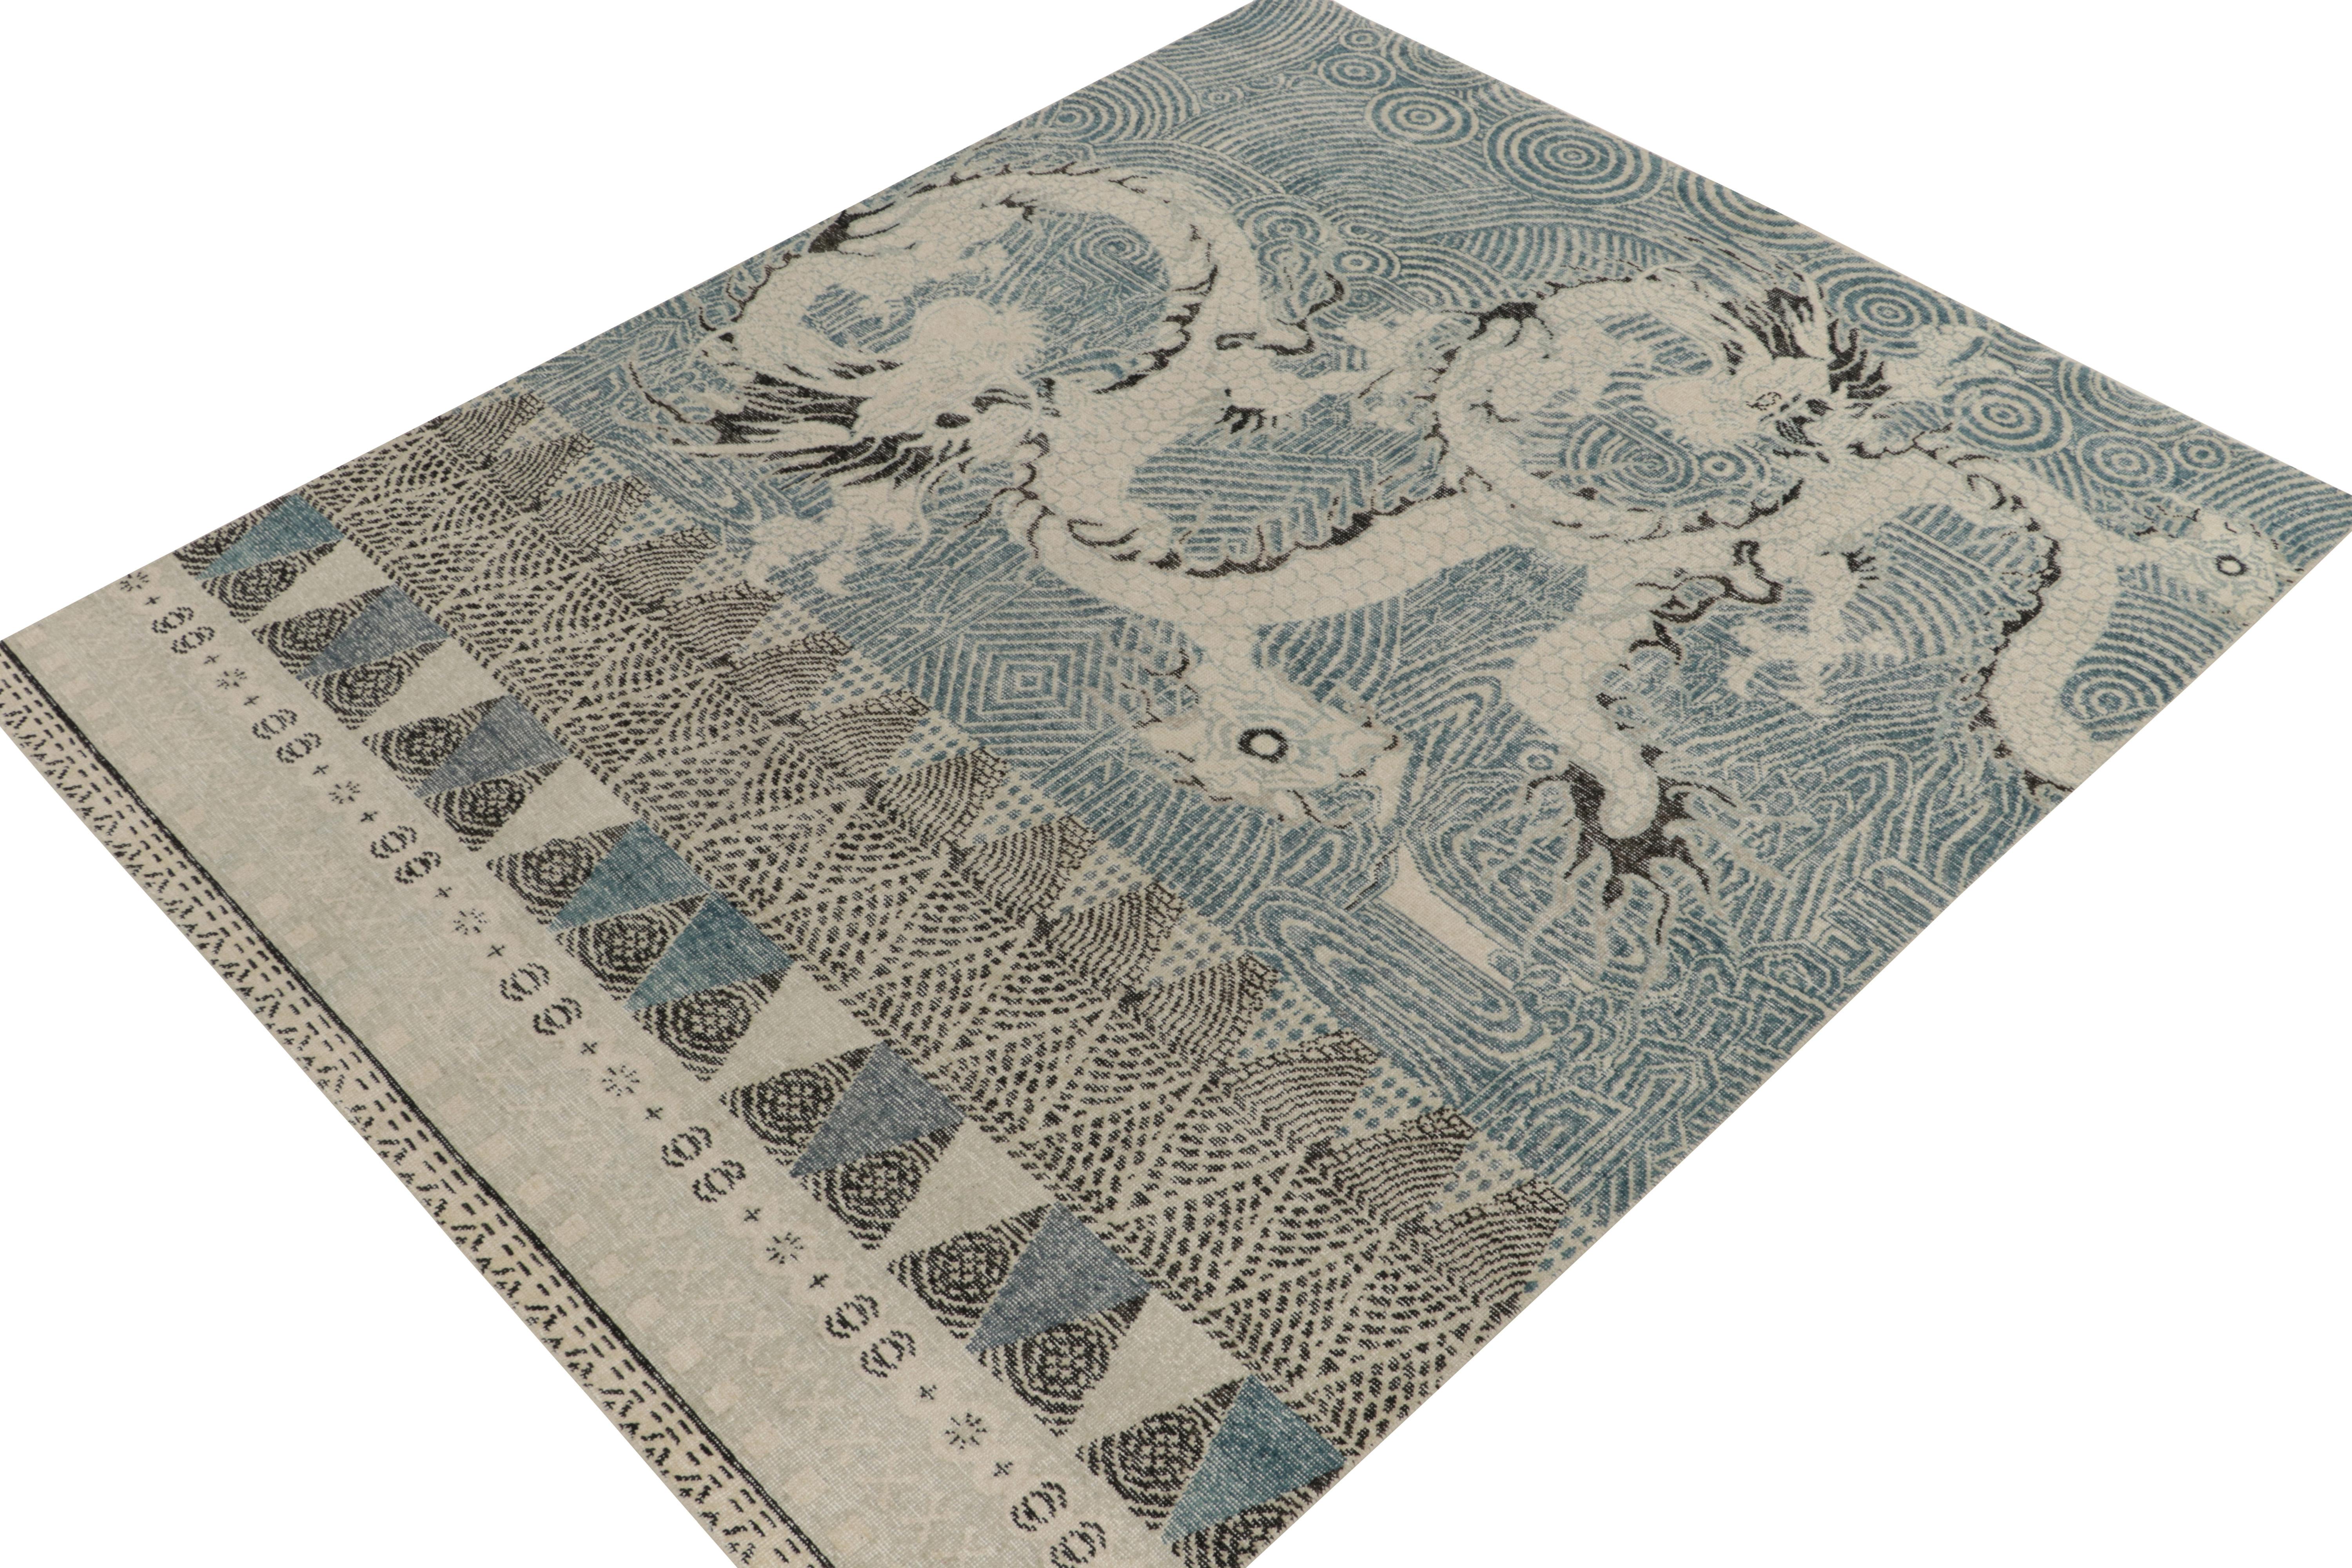 Hand-knotted in wool, an 8x10 piece from our Homage selections marking our take on antique Oriental Dragon rug designs. The bold graphic vision enjoys a unique modern approach with rippling curvature in muted blue, light gray & black accents playing